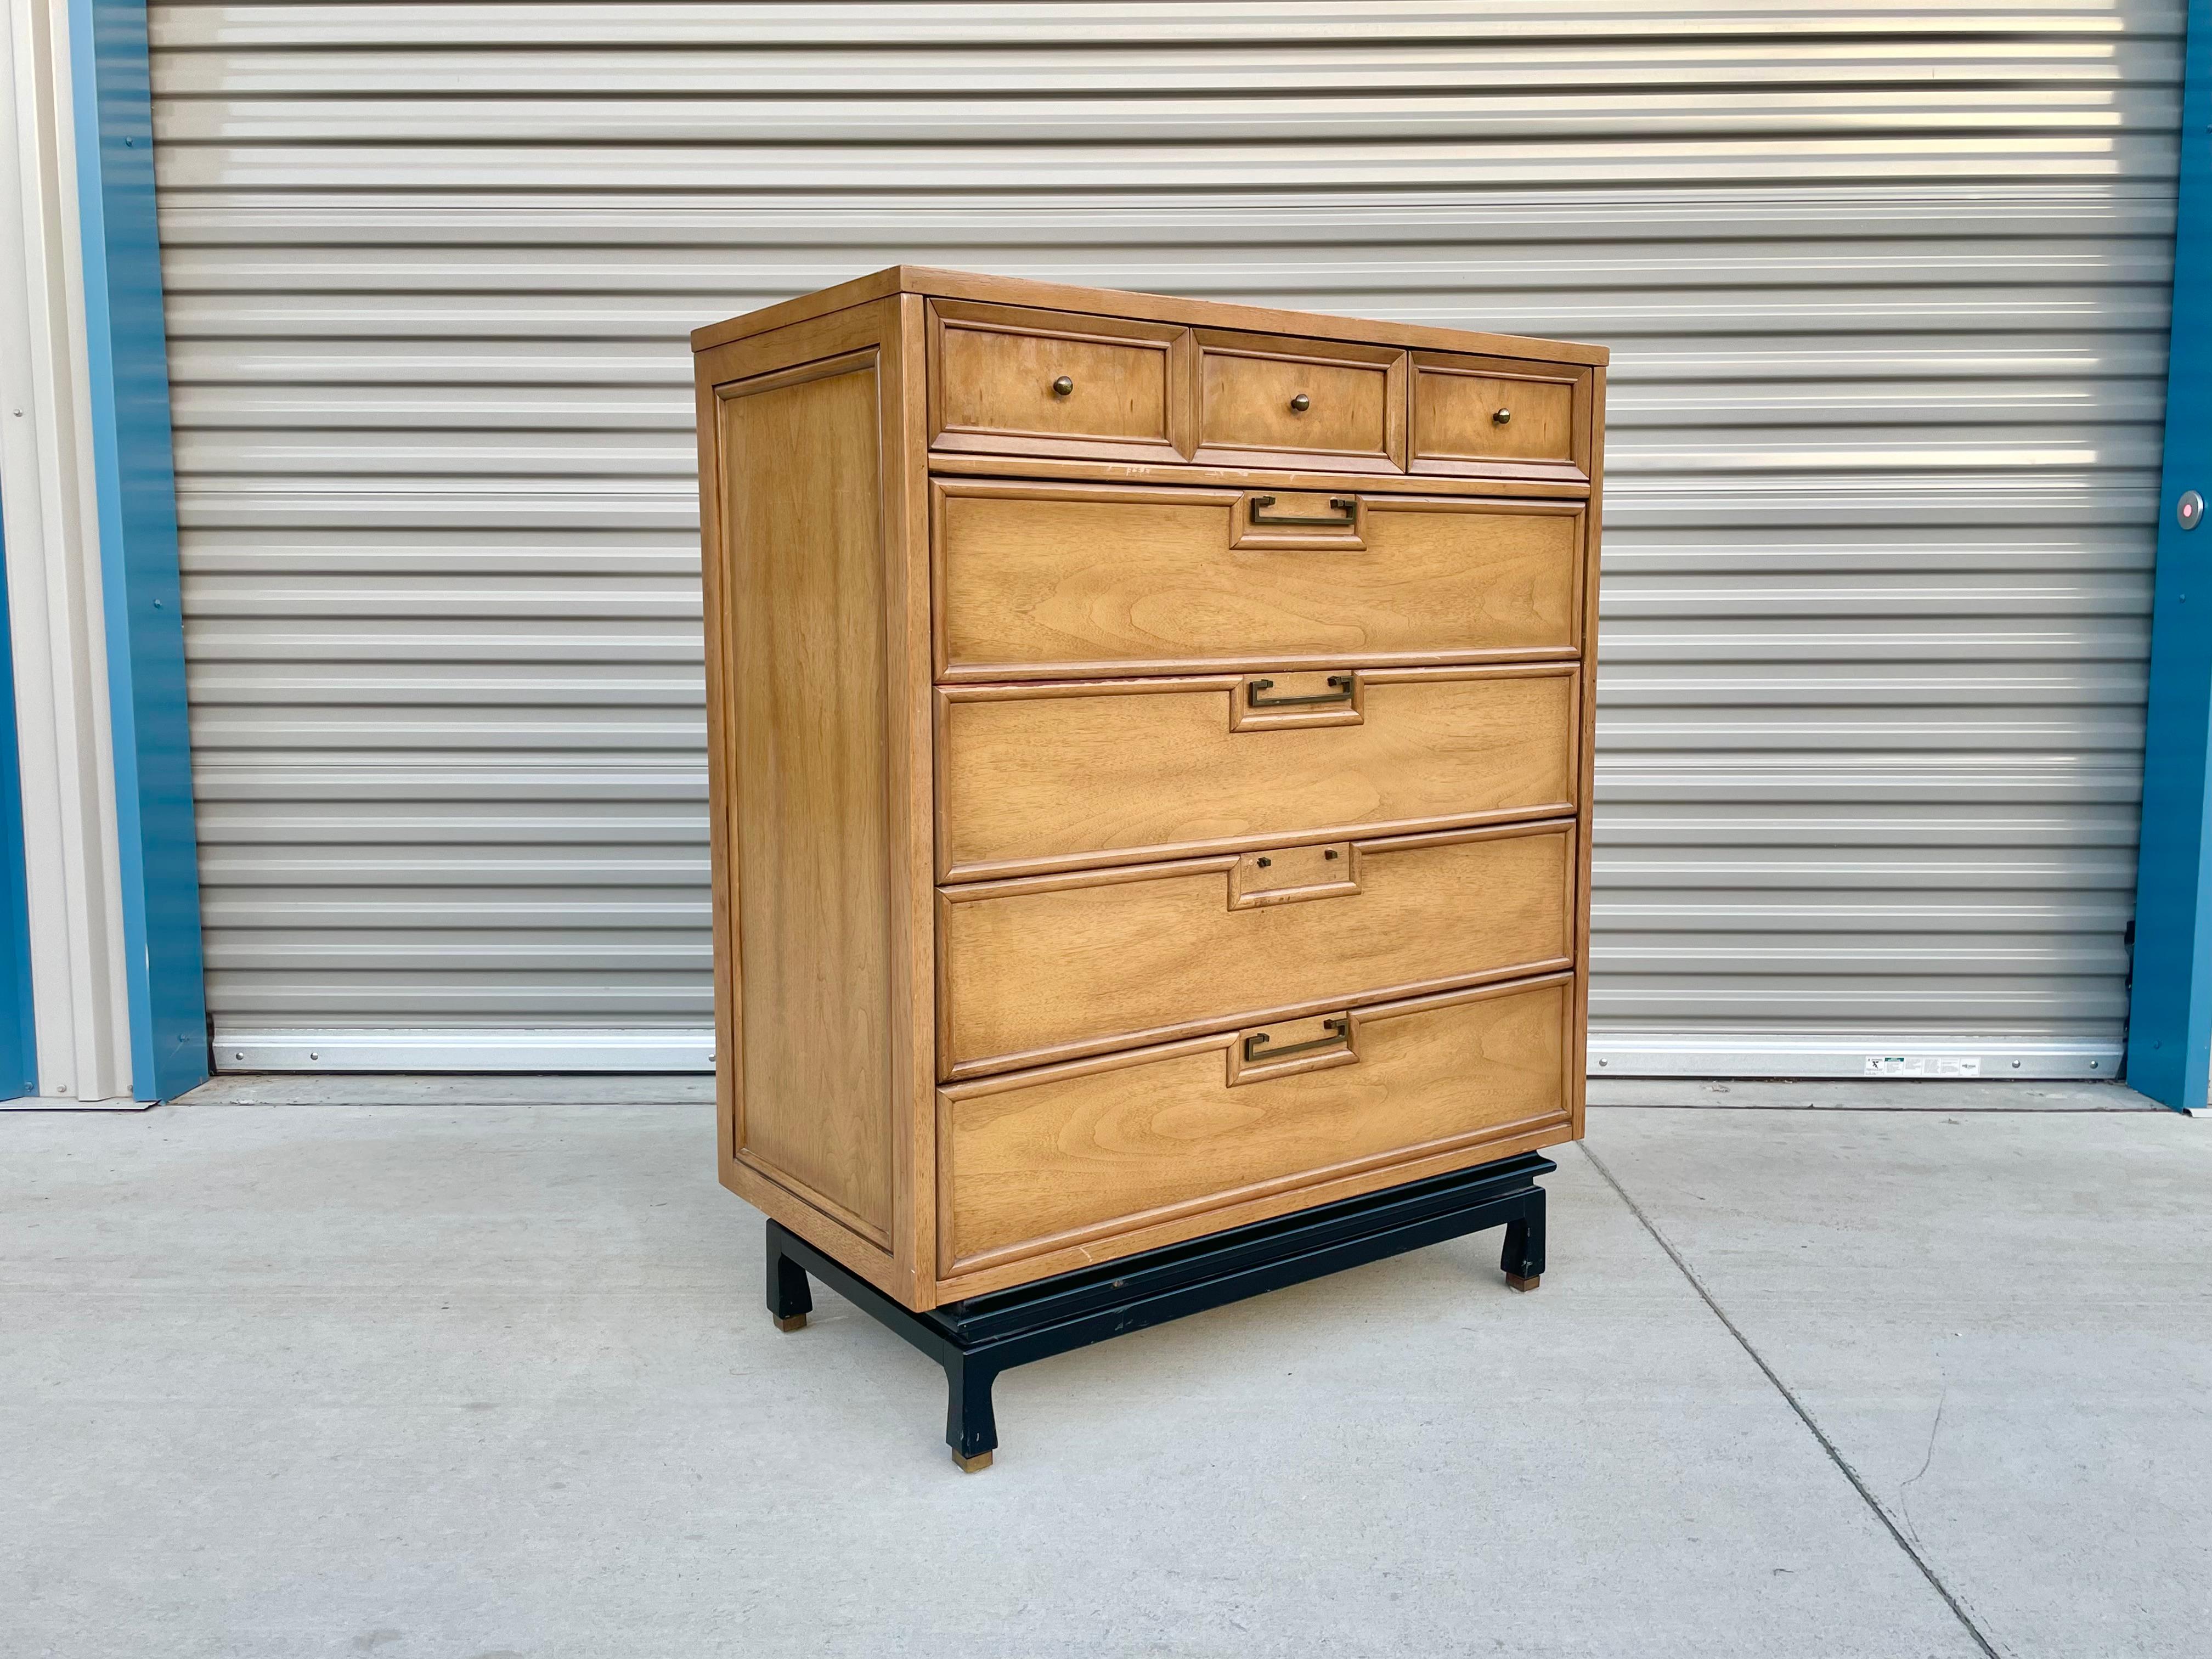 This stunning vintage highboy was designed and manufactured by American of Martinsville in the United States, circa 1950s. This elegant highboy features seven drawers with original brass handles and sits on a sculpted black base with brass sabots.